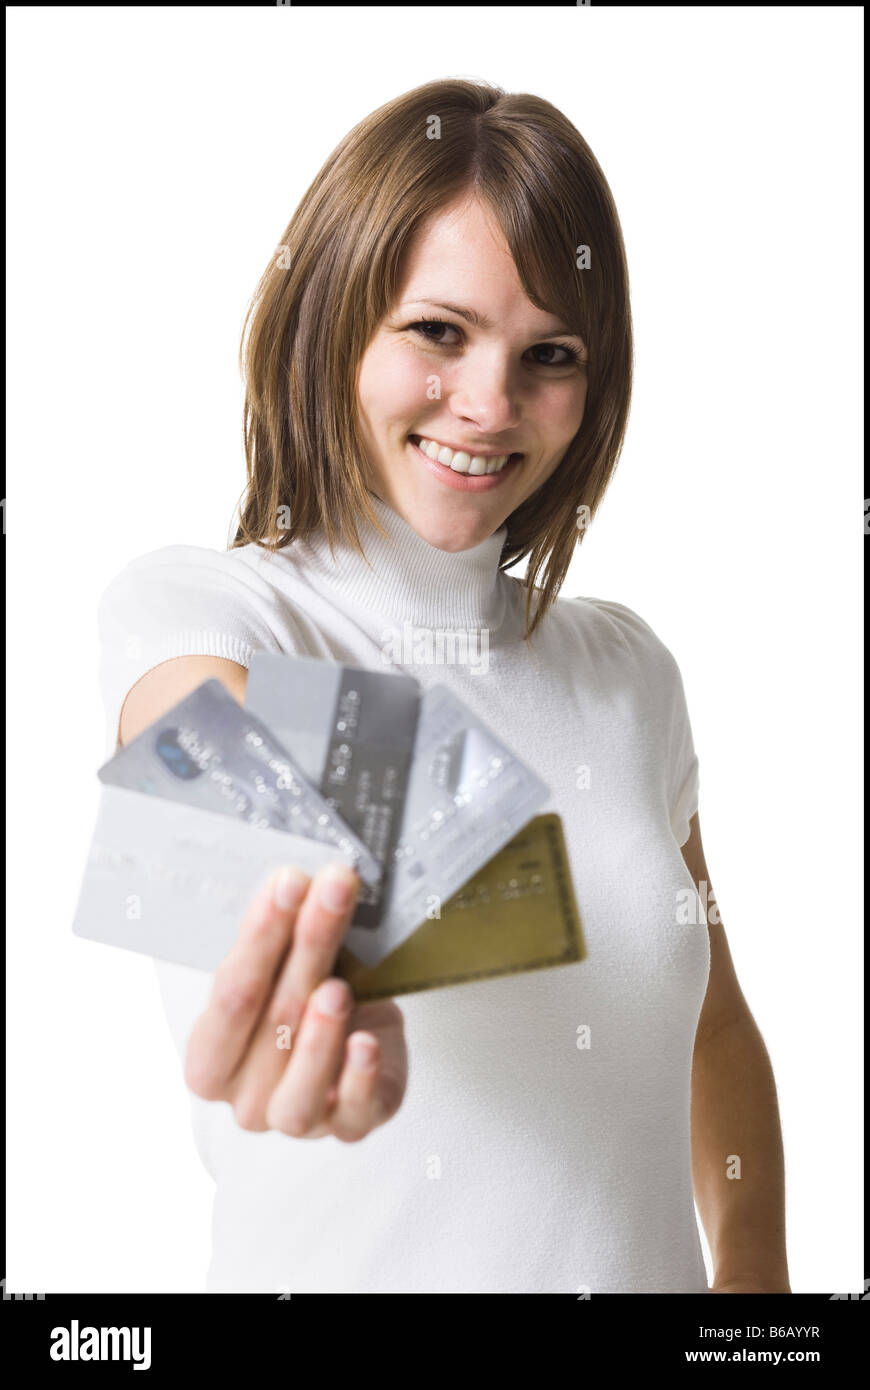 woman with credit cards Stock Photo